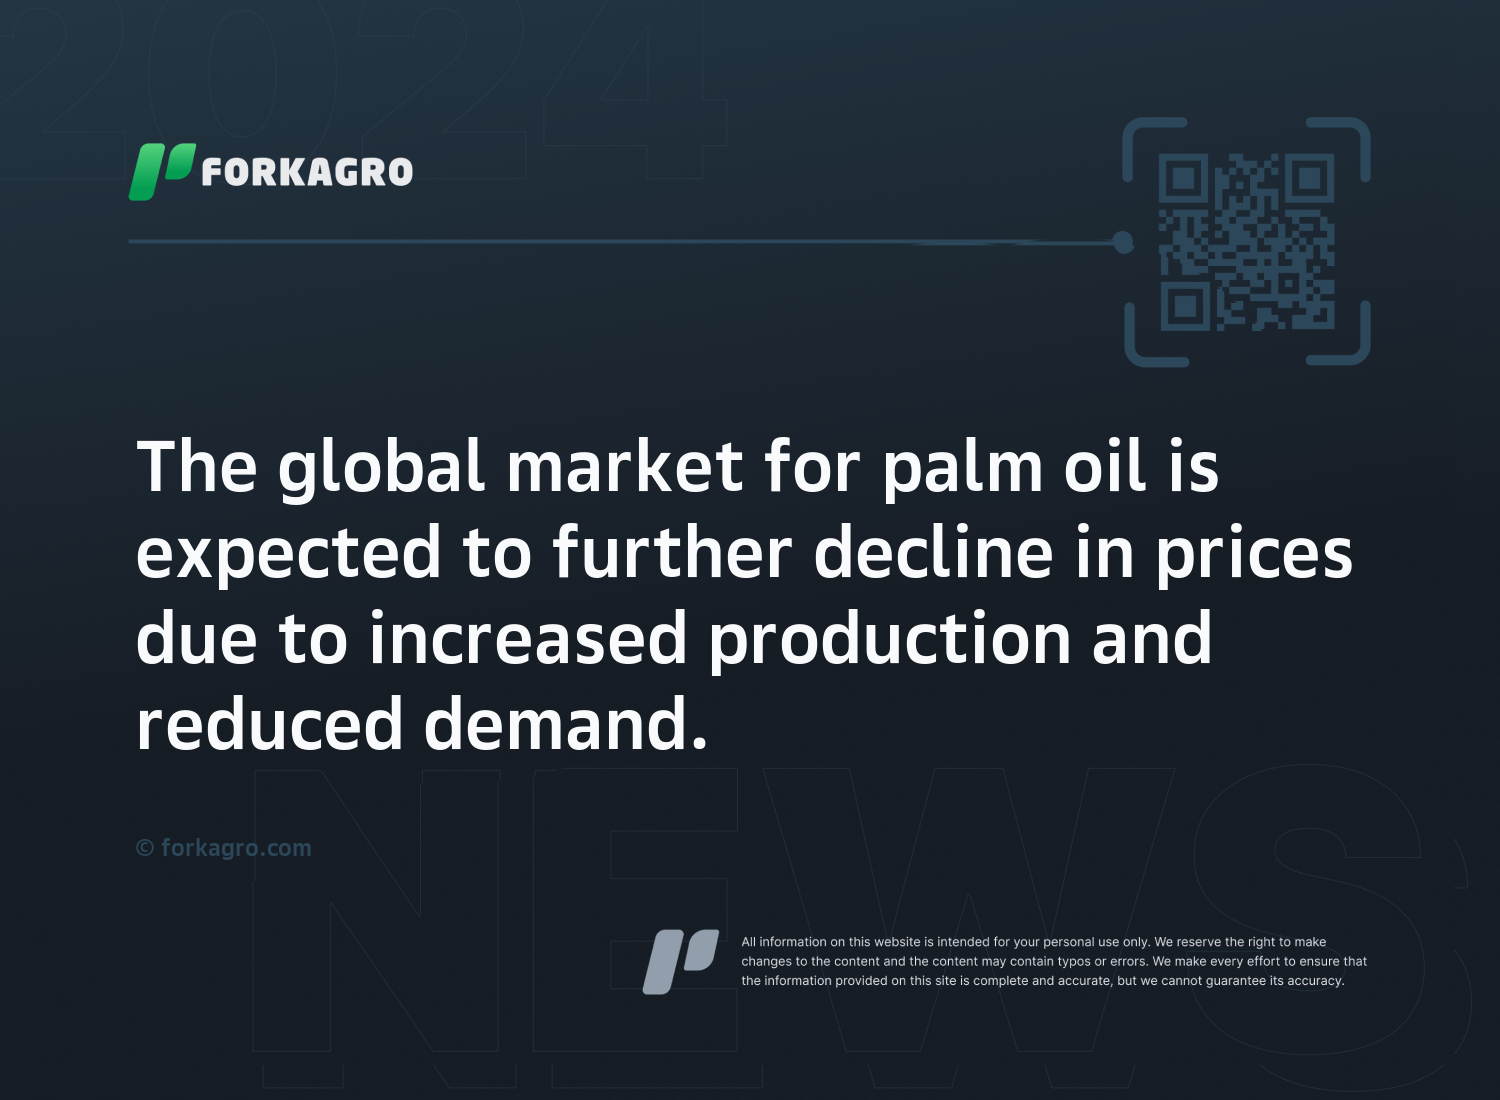 The global market for palm oil is expected to further decline in prices due to increased production and reduced demand.